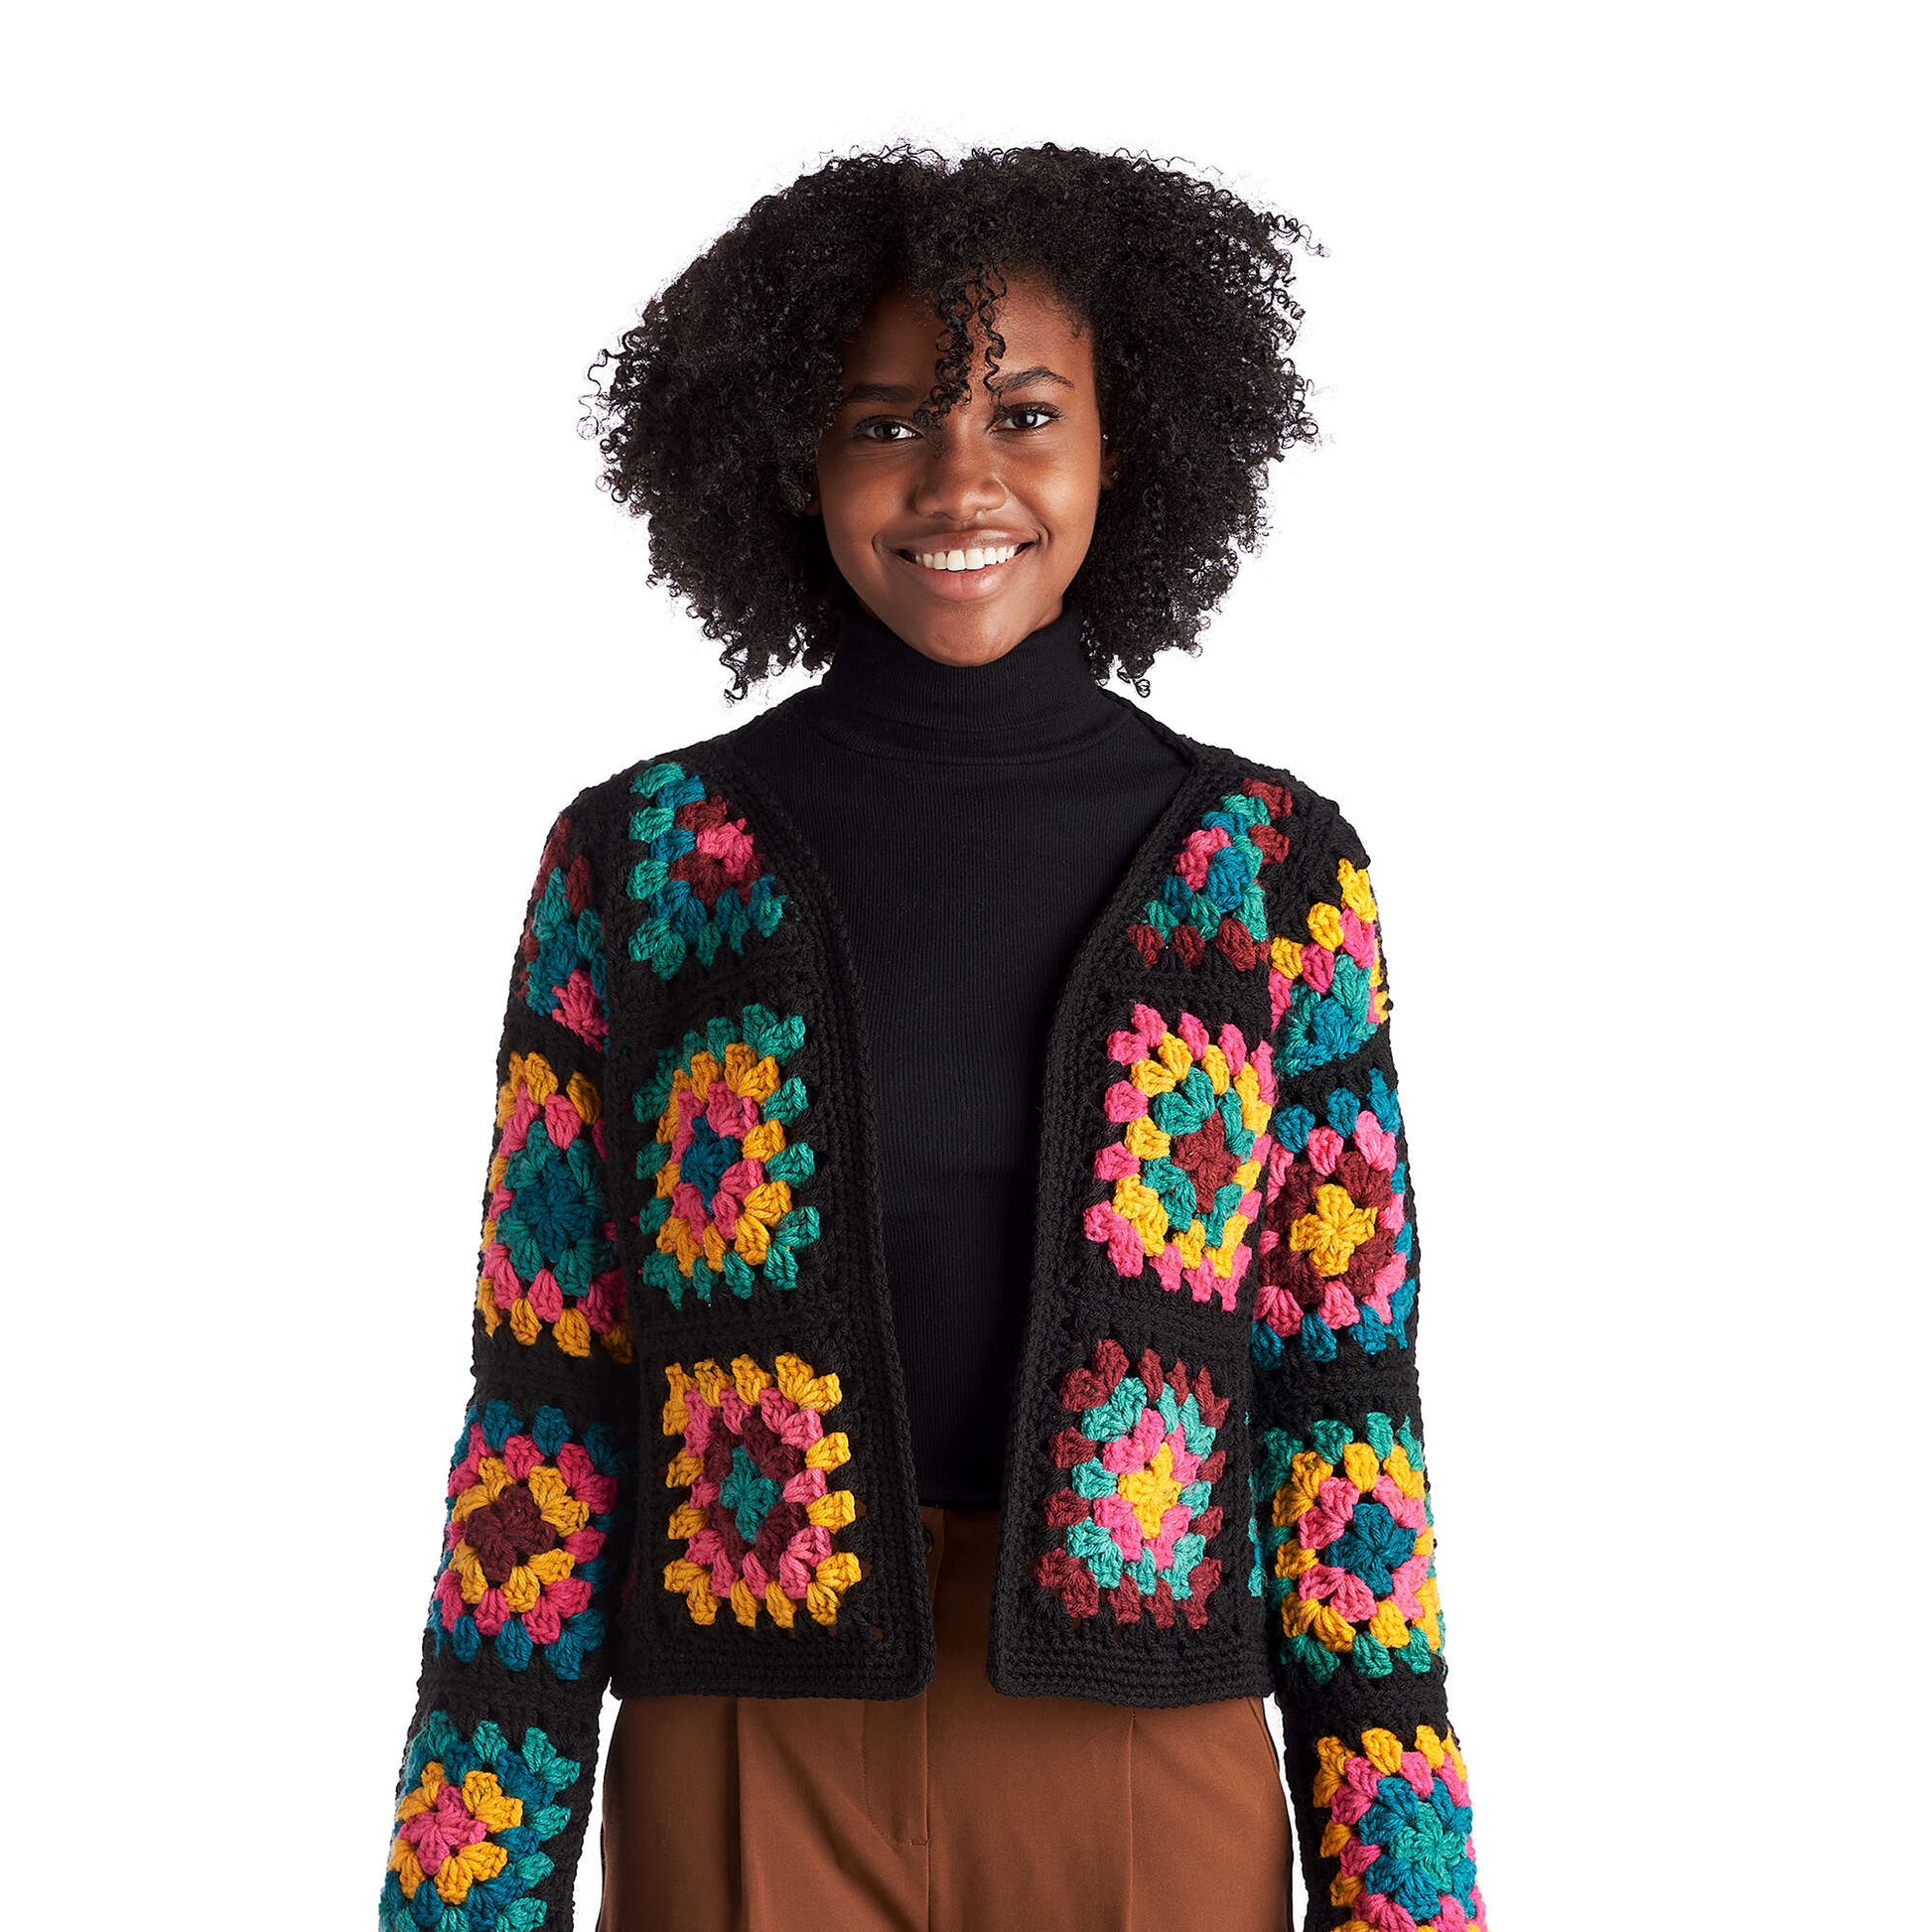 Free Red Heart Granny Square Jacket Pattern